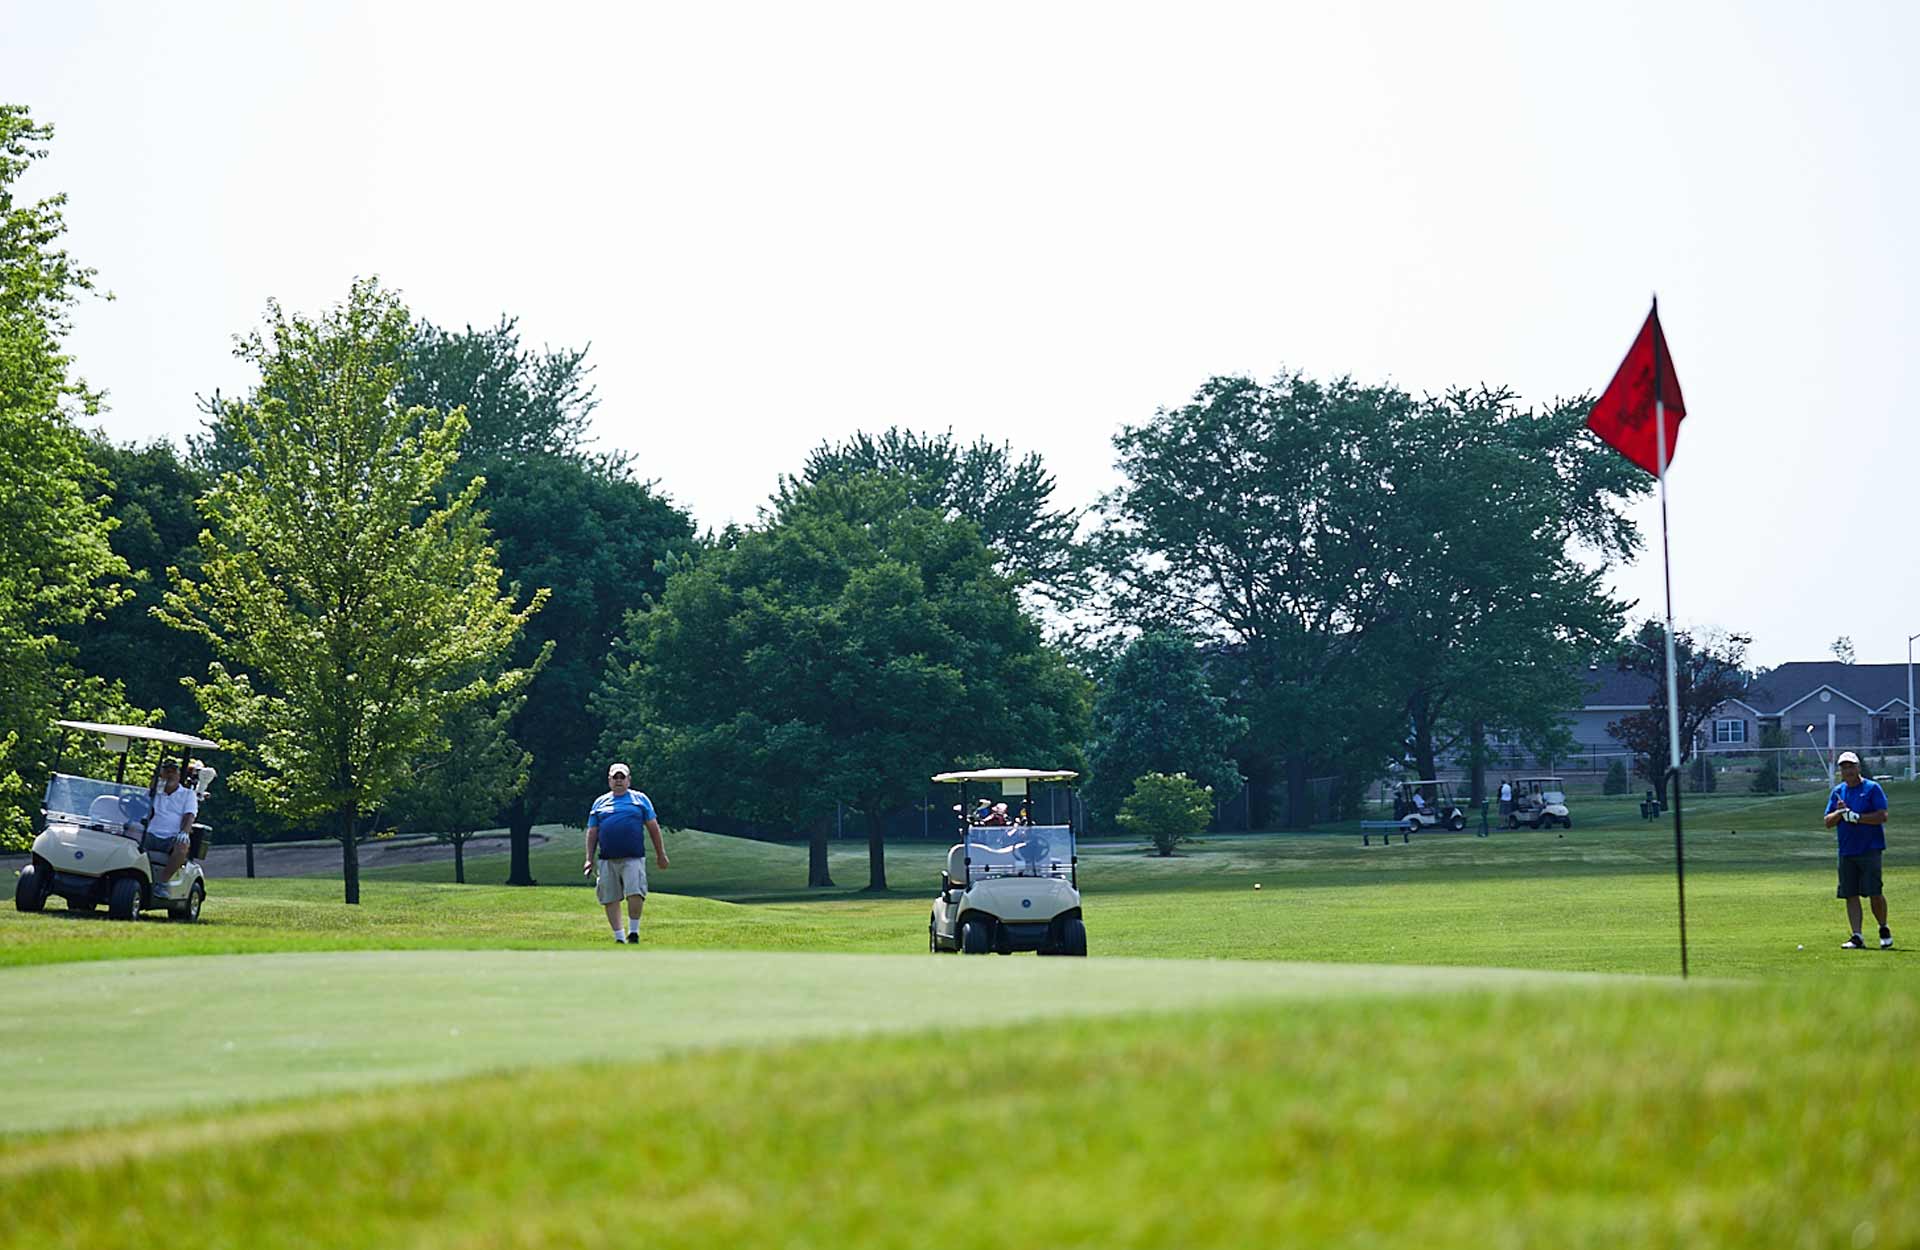 golfers approaching the green on foot and in carts on the golf course